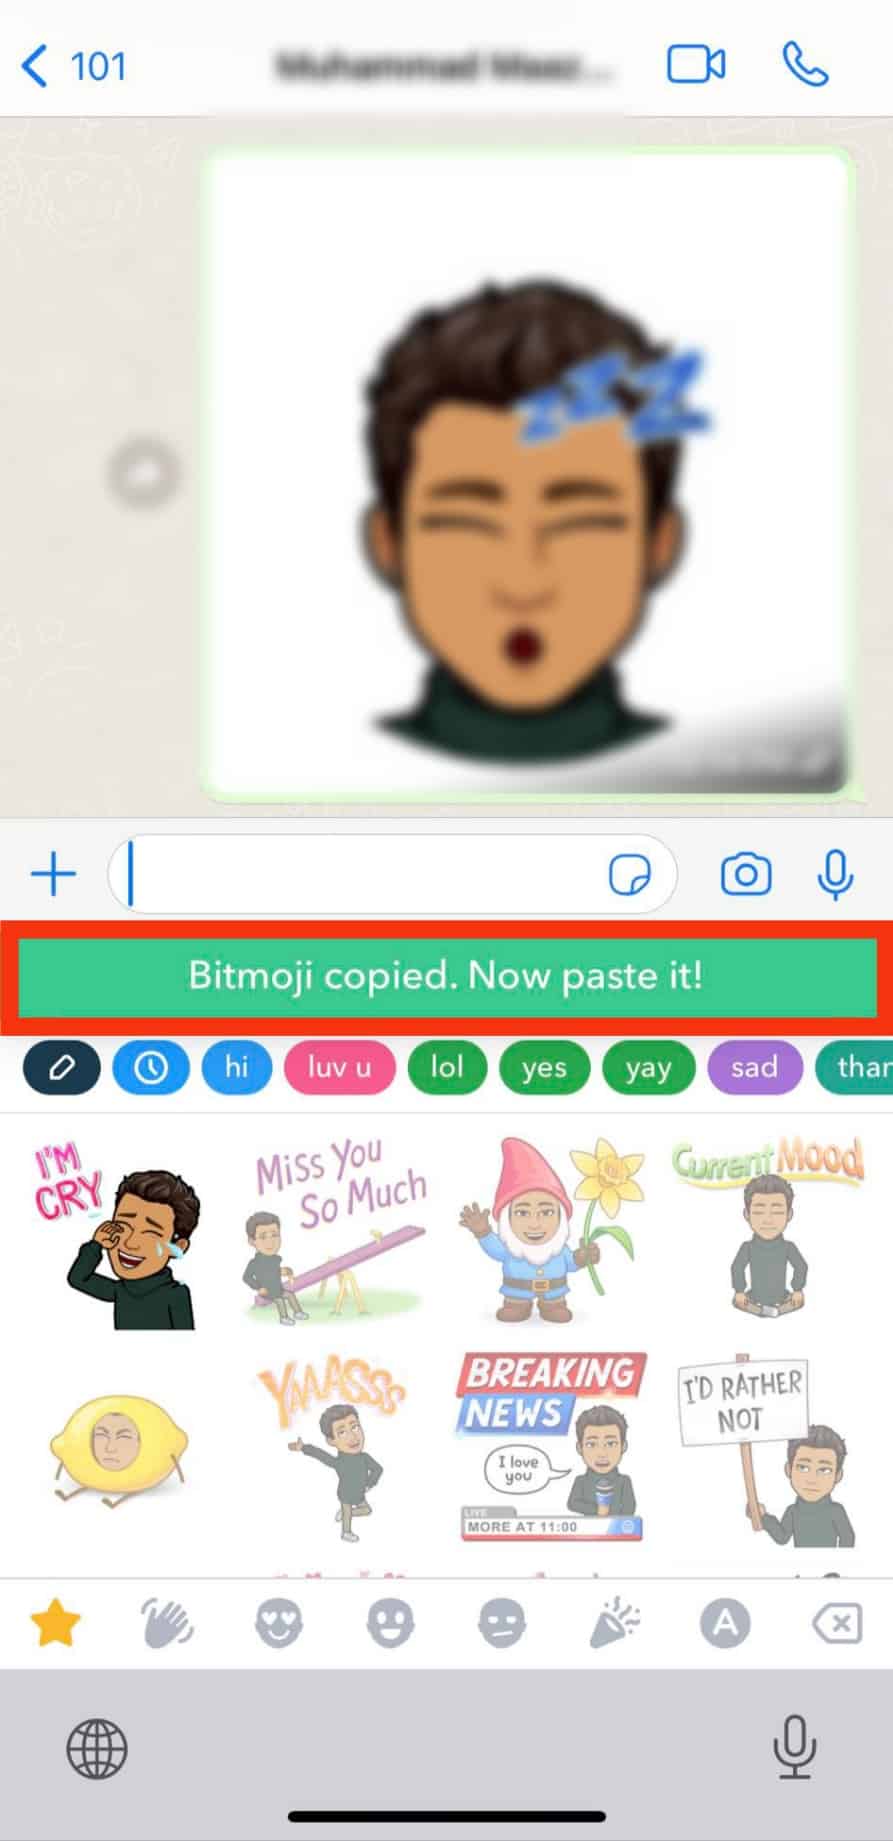 You'll See A Bitmoji Copied. Now Paste It